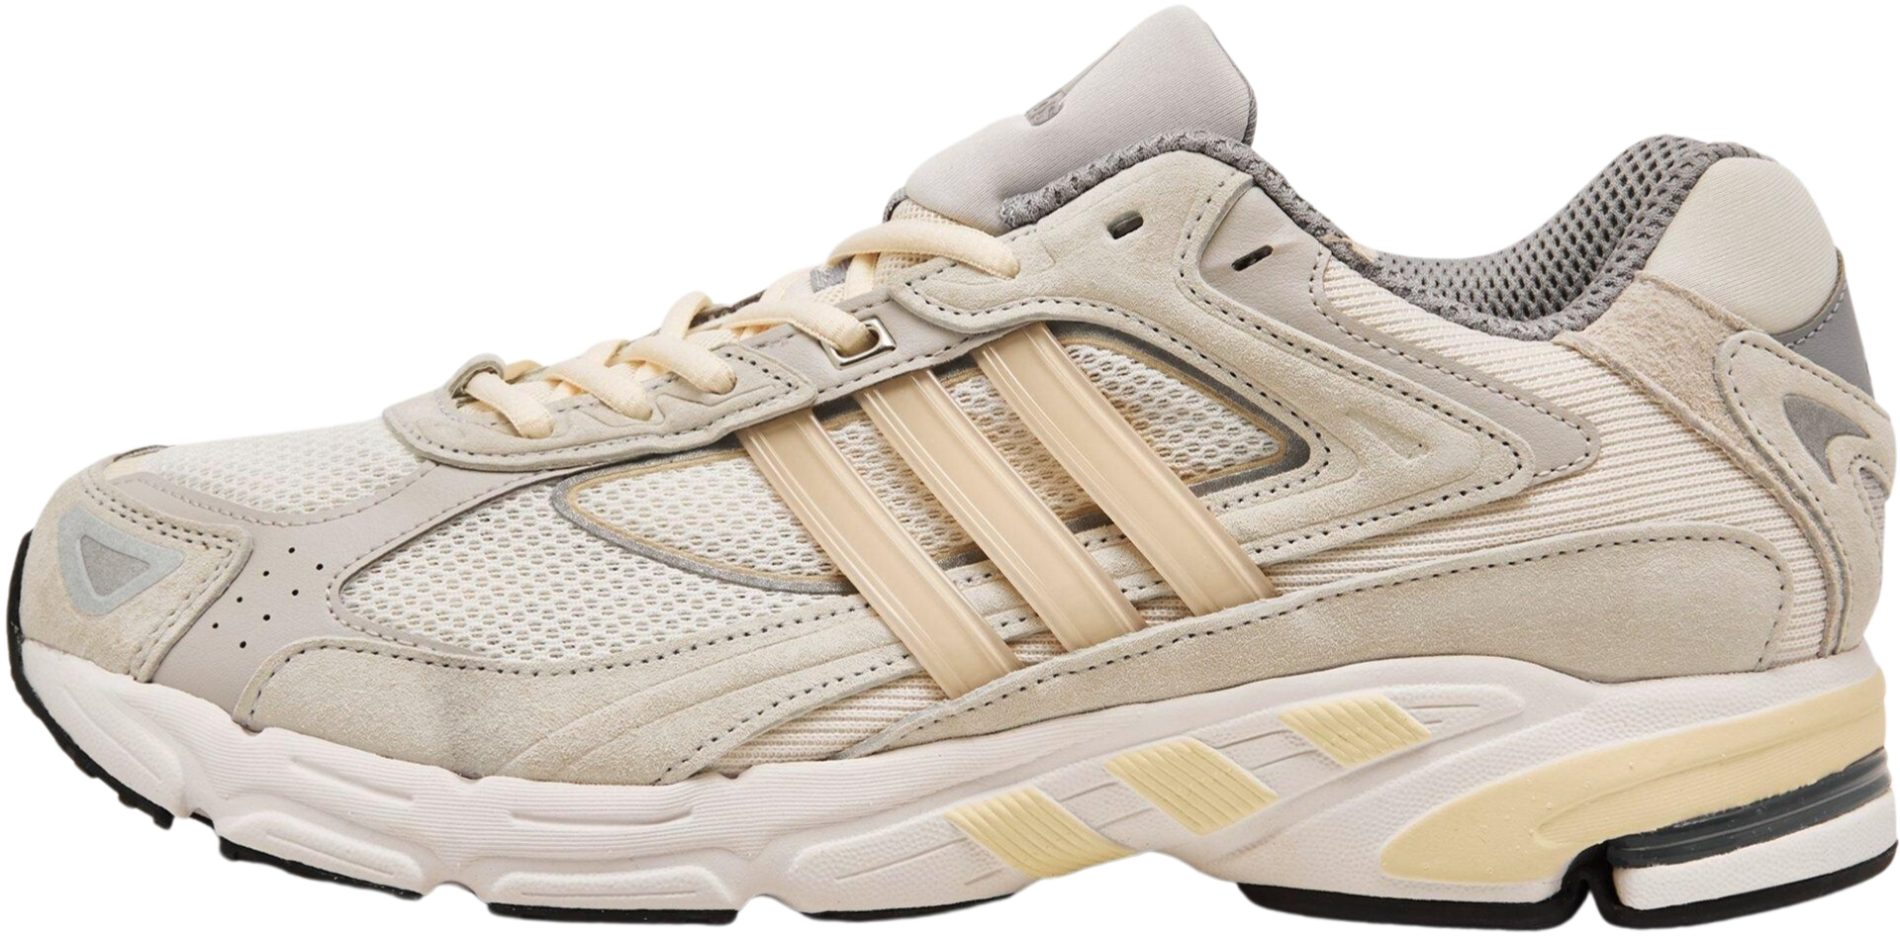 Infrastructure-intelligenceShops, adidas x wales bonner white nizza lo  sneakers item Review, Facts | Comparison, adidas x wales bonner white nizza  lo sneakers item